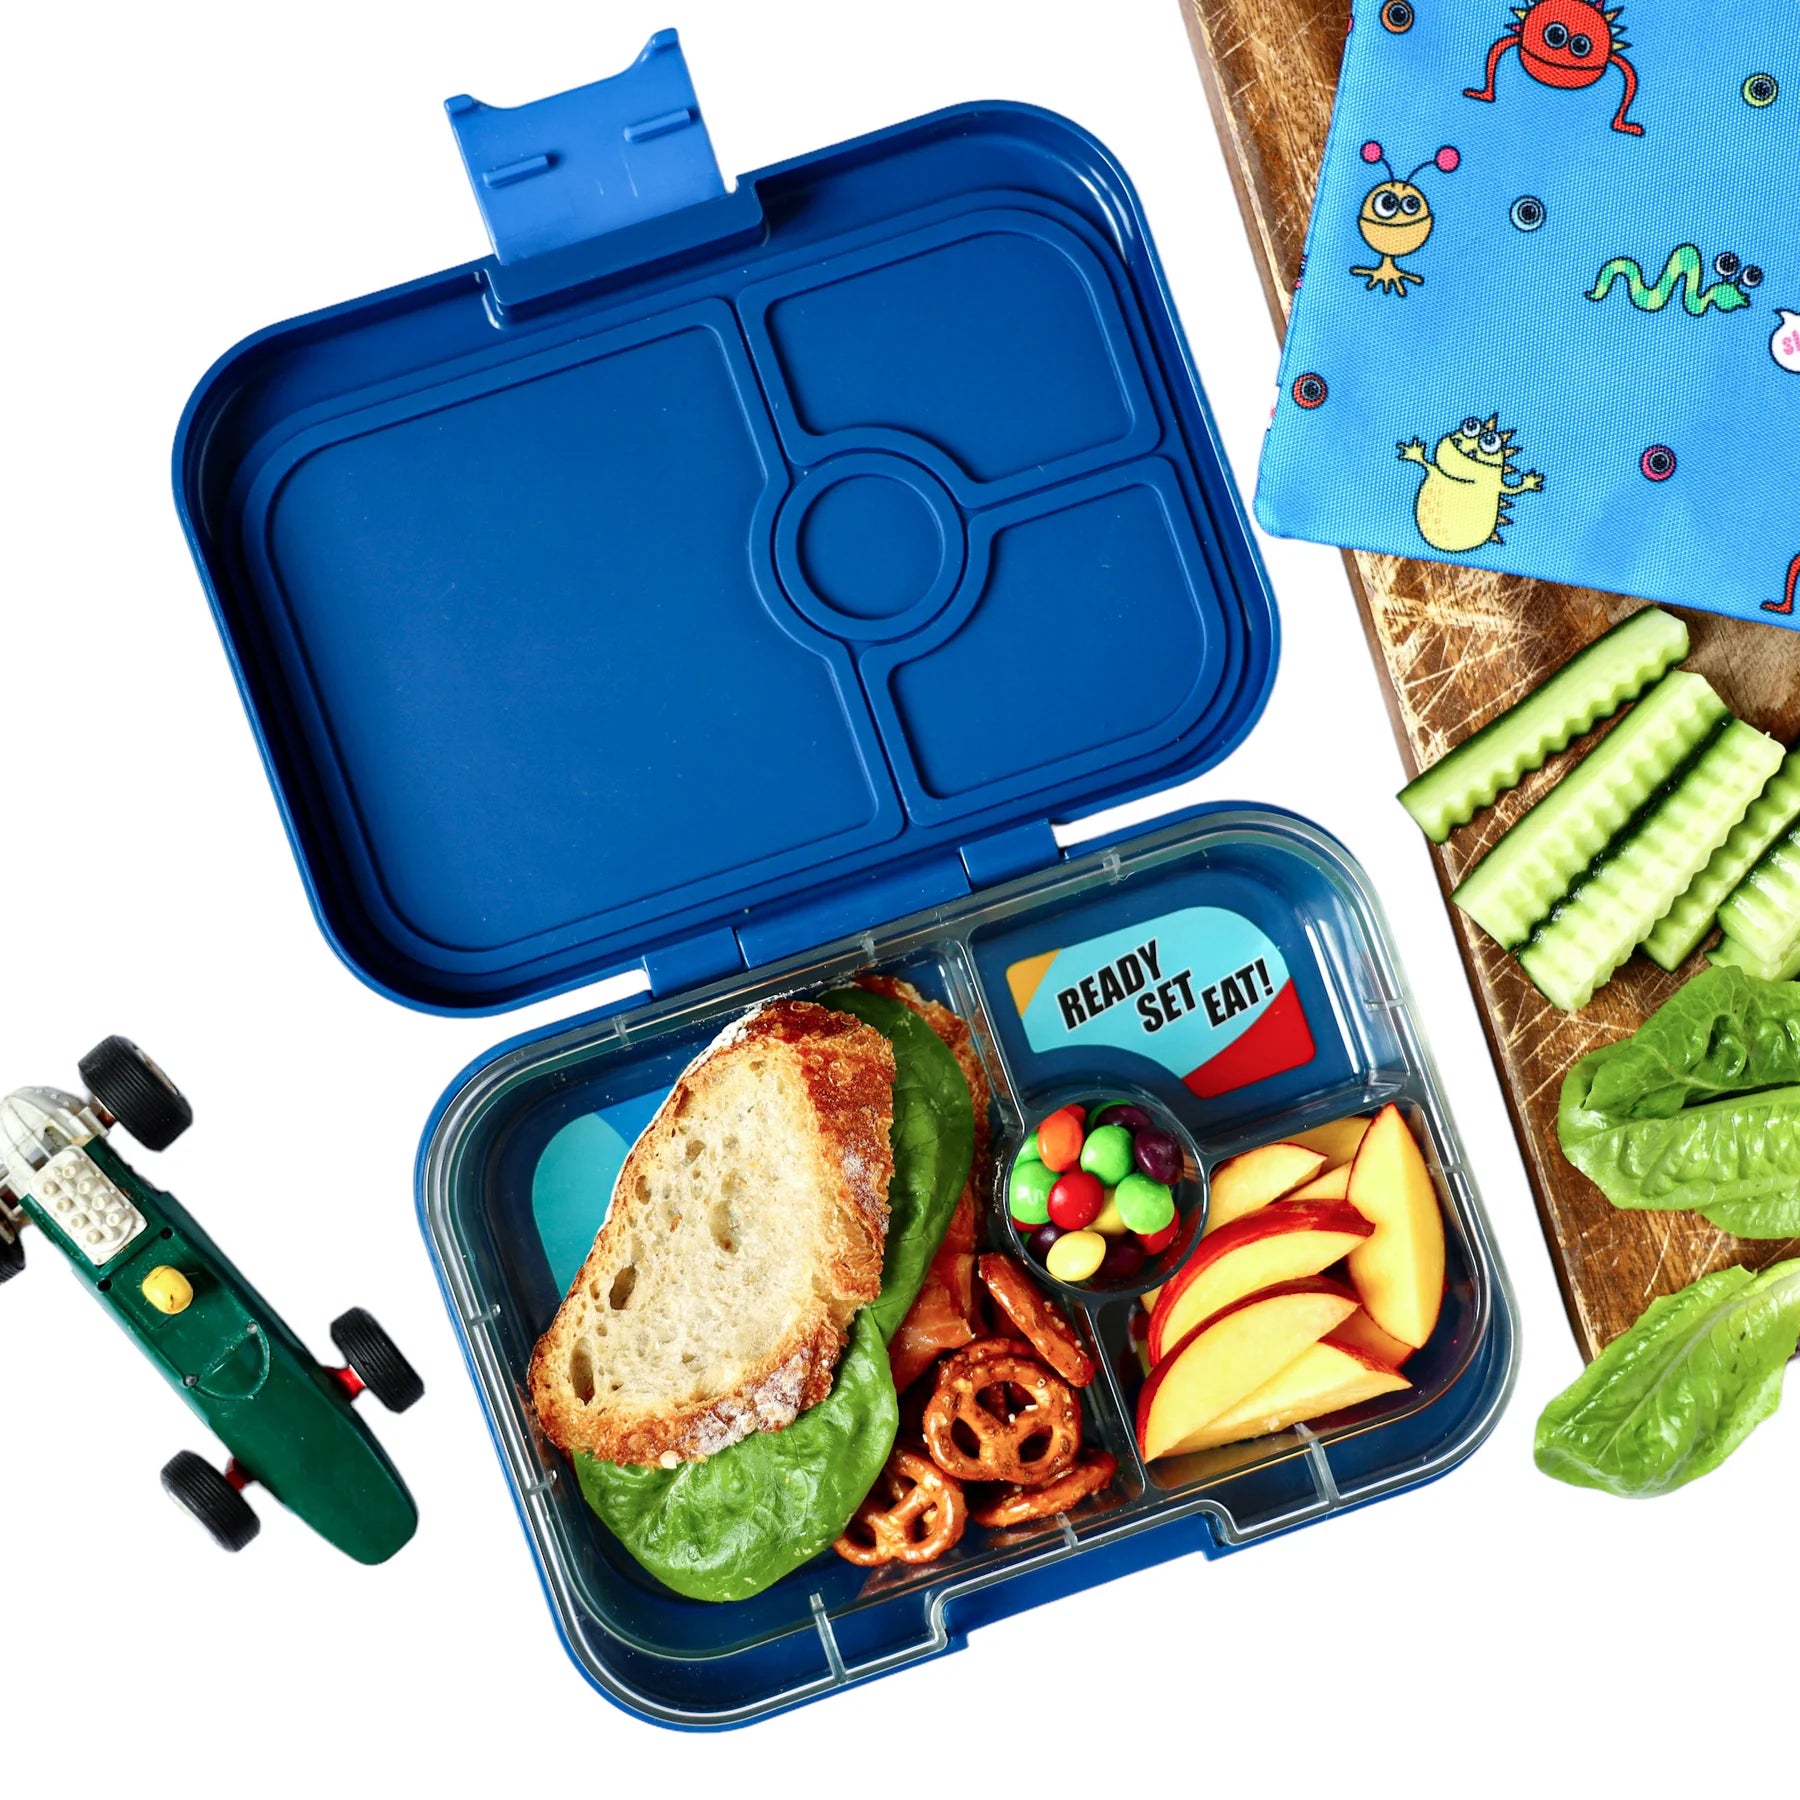 Bento School Lunches : 6 Fun Lunchbox Ideas For Your Yumbox